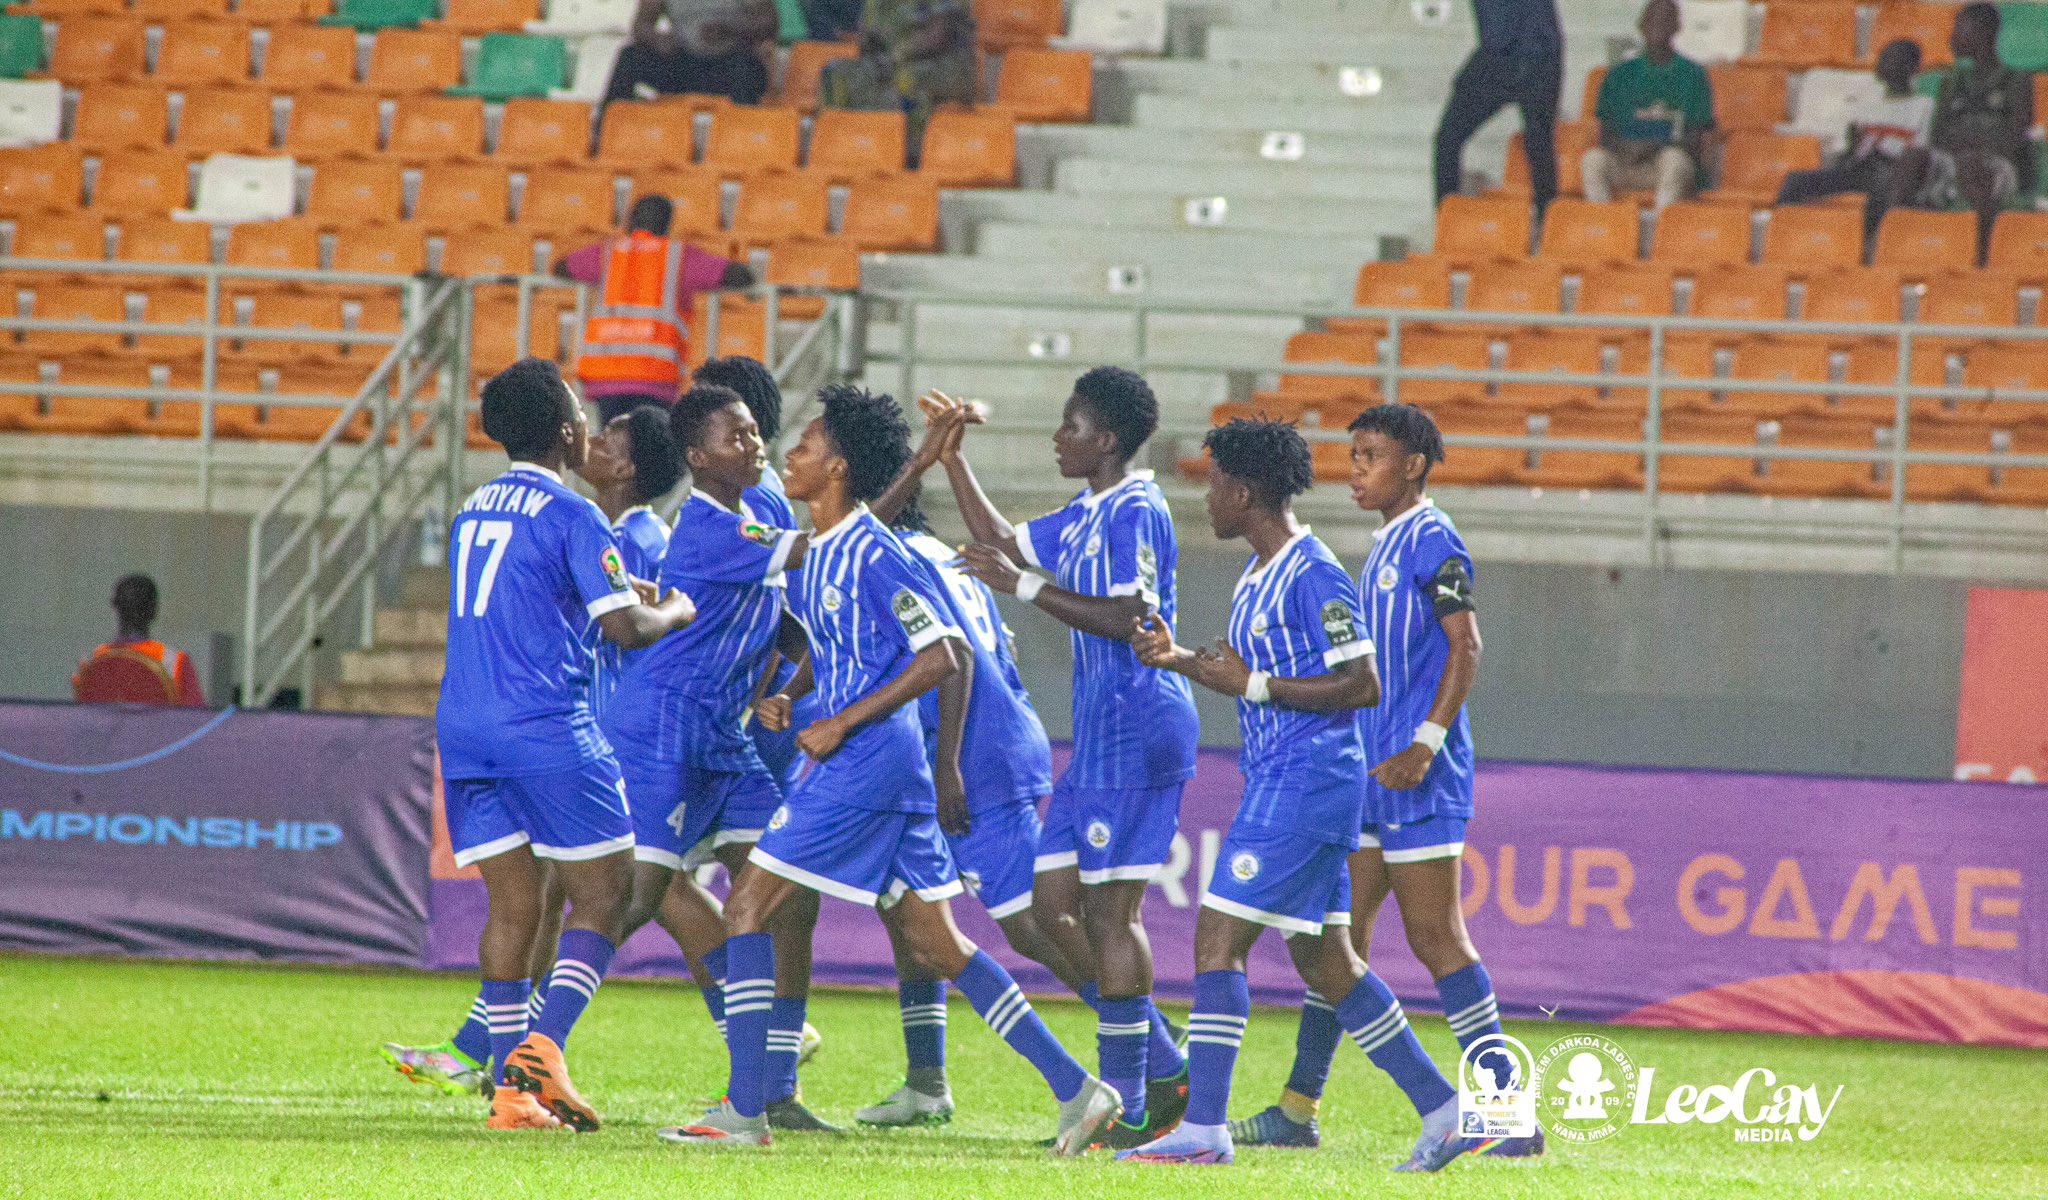 CAF Women’s Champions League: Ampem Darkoa Ladies through to semis after 3-1 win over Huracanes FC